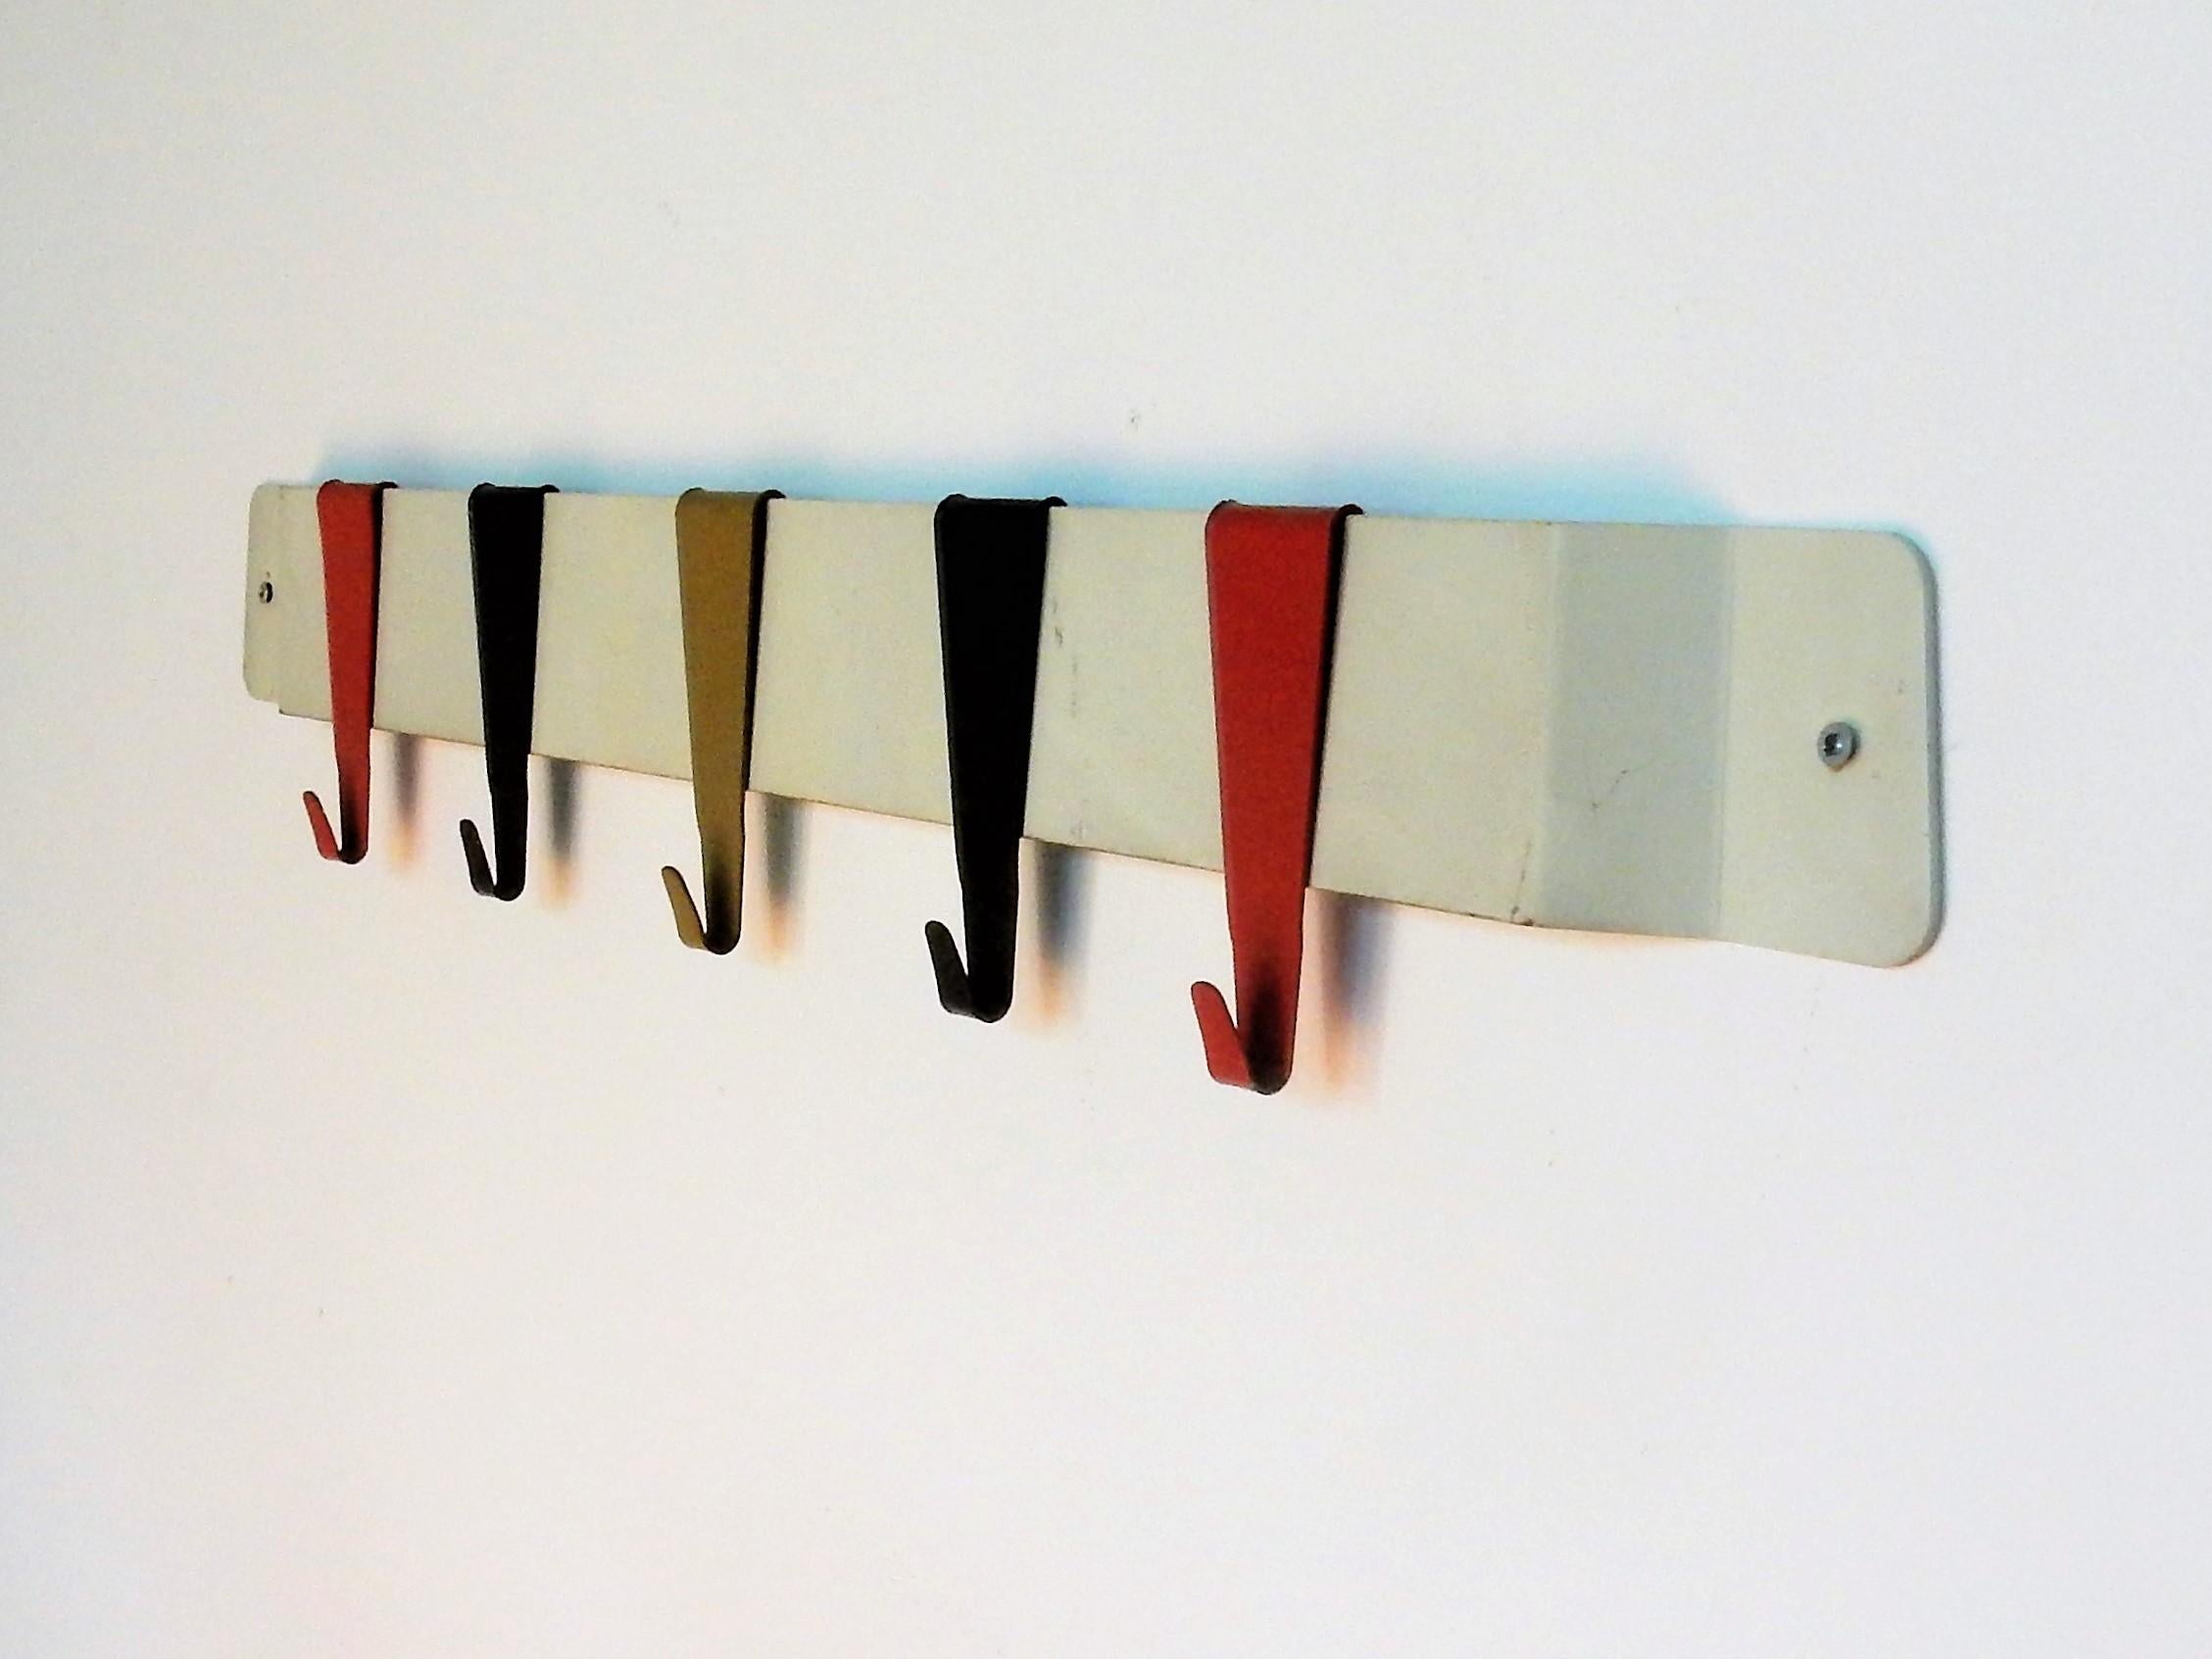 Mid-Century Modern Small Industrial Coat Rack by Coen de Vries for Pilastro, the Netherlands, 1950s